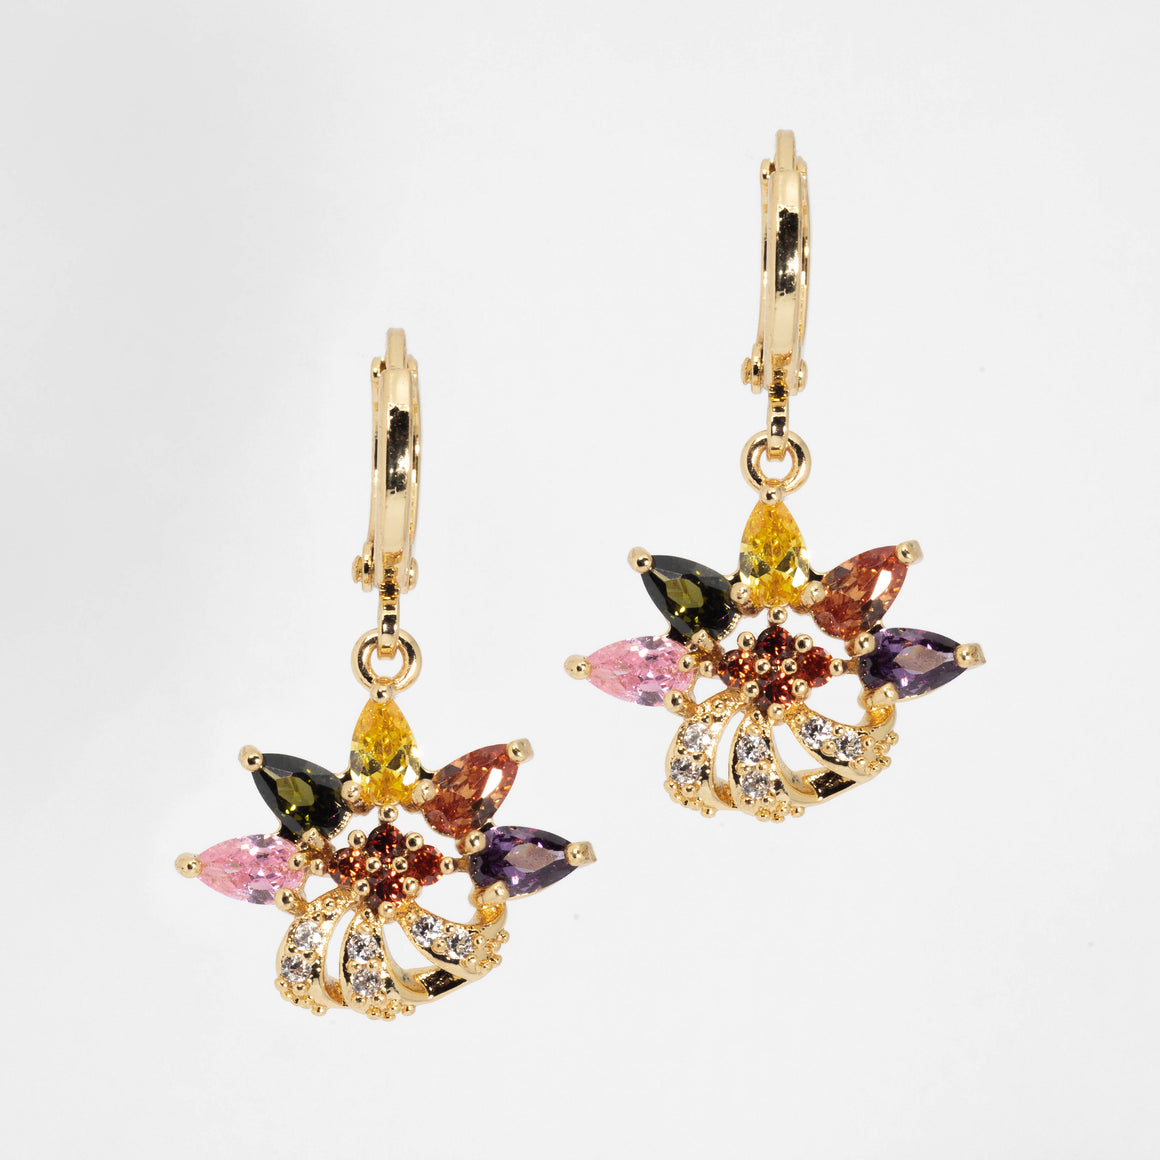 Colorful Dimond Earrings